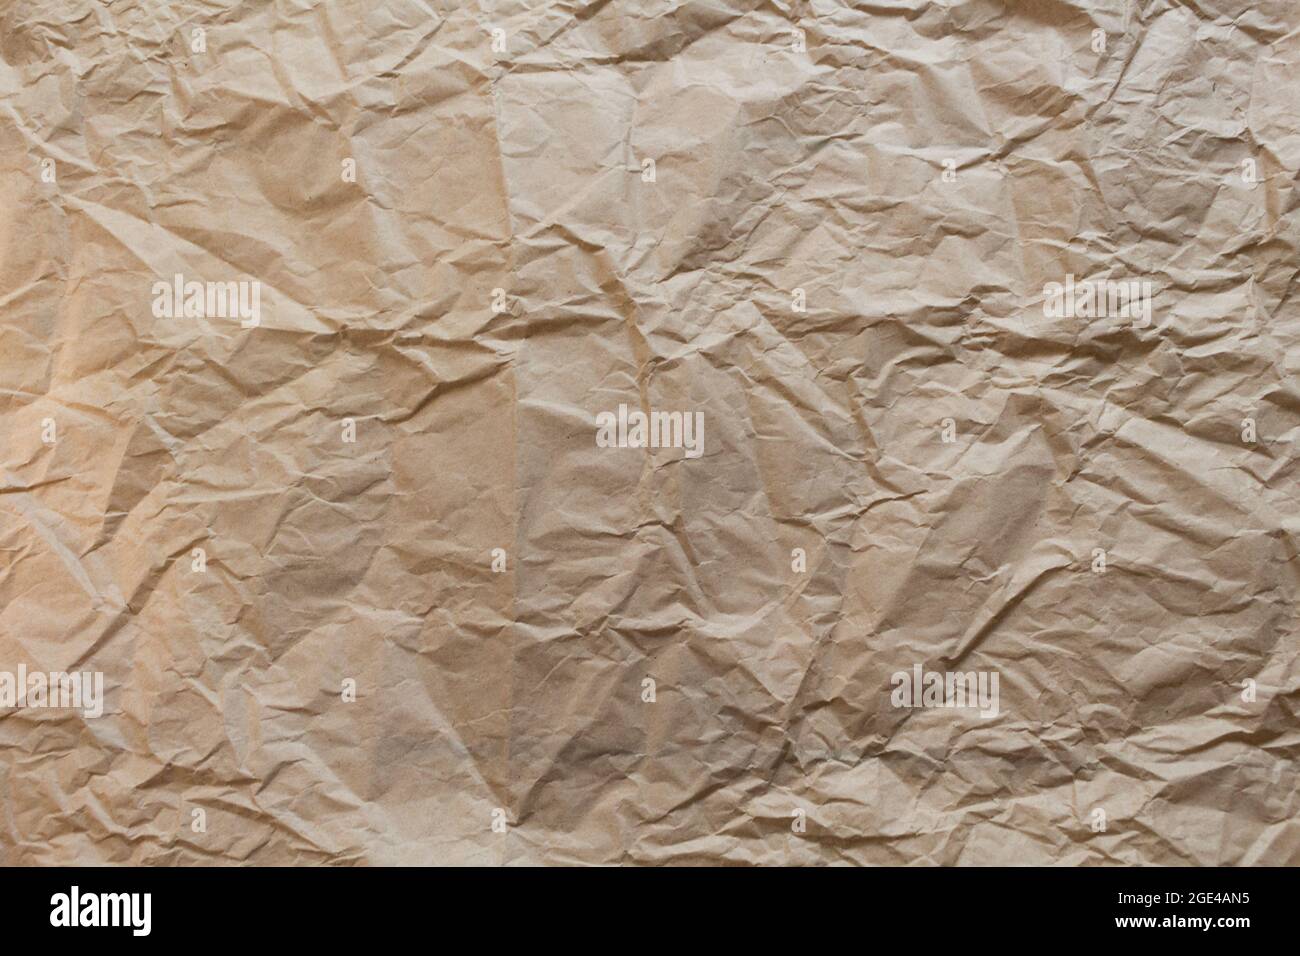 Background of crumpled kraft paper. Background for a shop, web site, in rustic style. Natural lifestyle concept with organic and recycling materials. Stock Photo